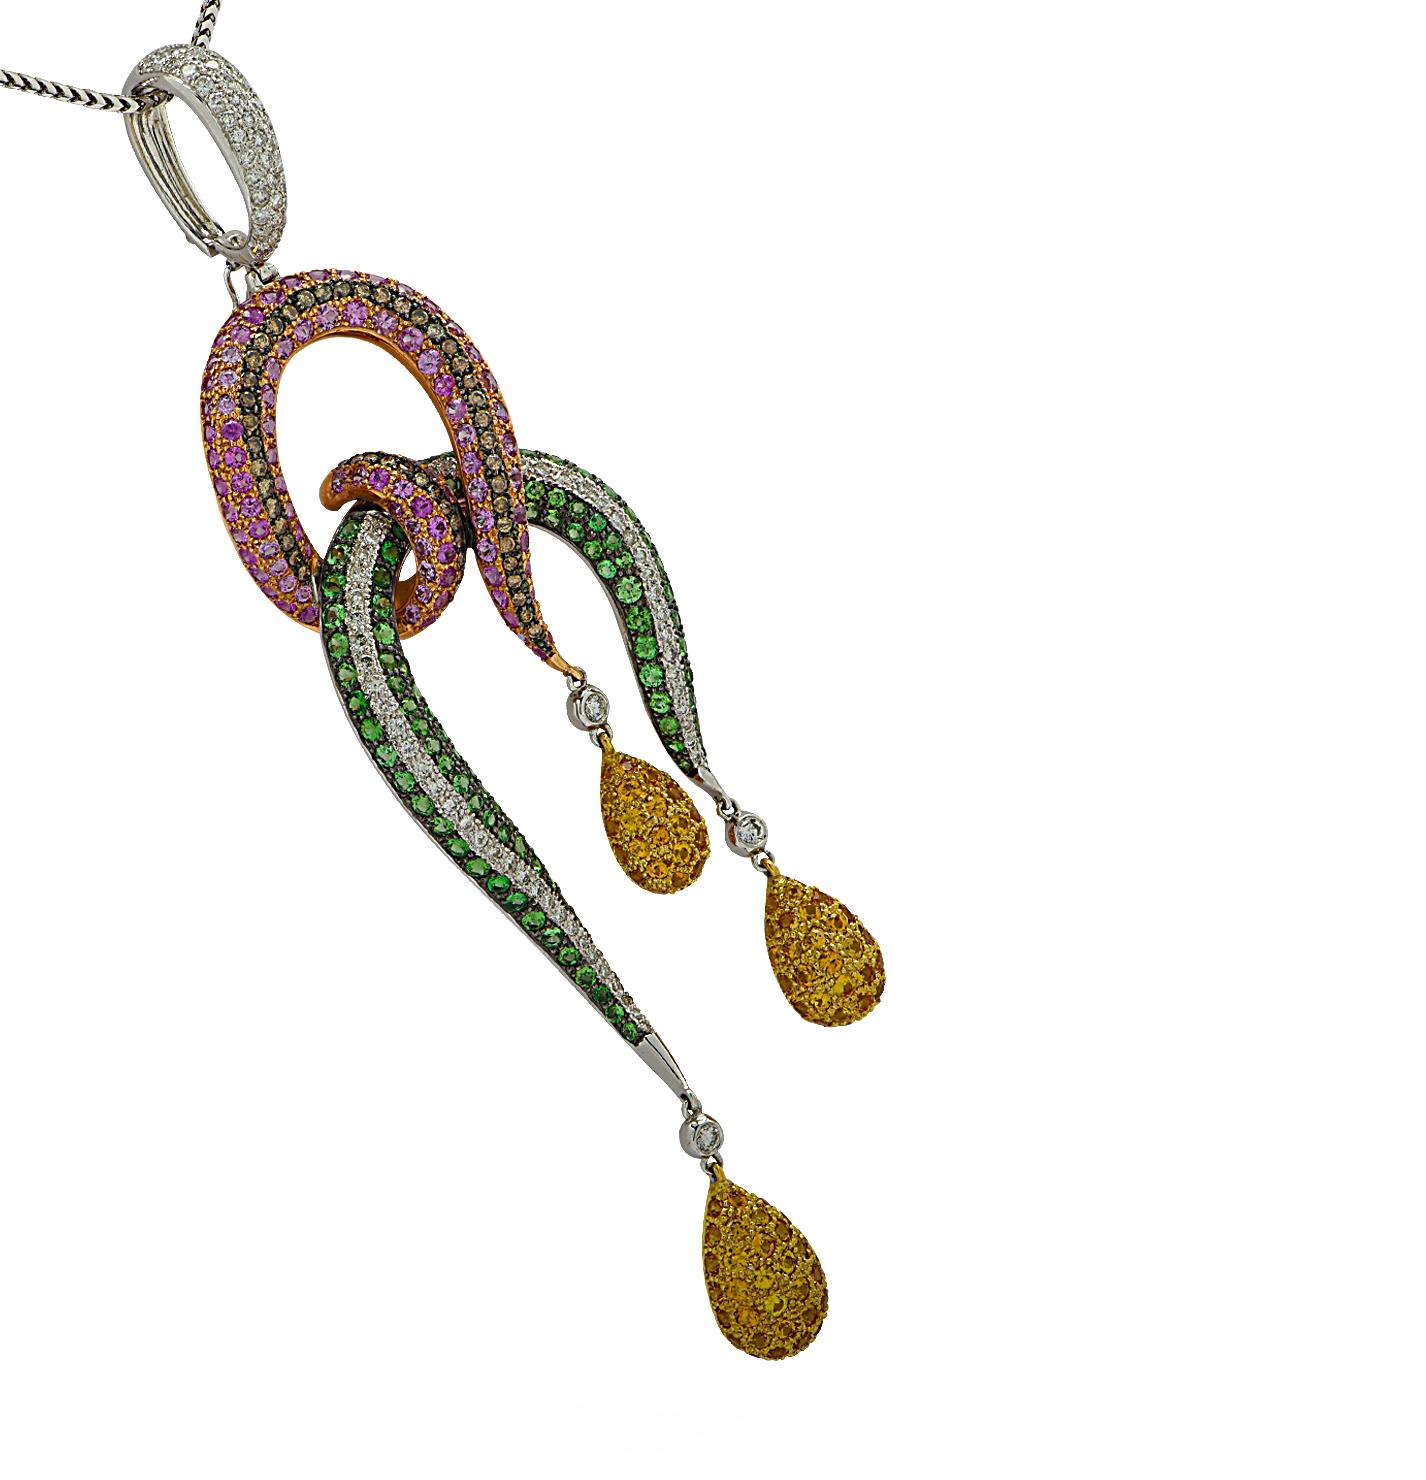 Striking necklace and pendant crafted in white gold featuring 2.46 carats of round brilliant cut diamonds, G color, VS-SI clarity, and brown diamonds, Pink and Yellow Sapphires weighing approximately 8.77 carats total and Emeralds weighing